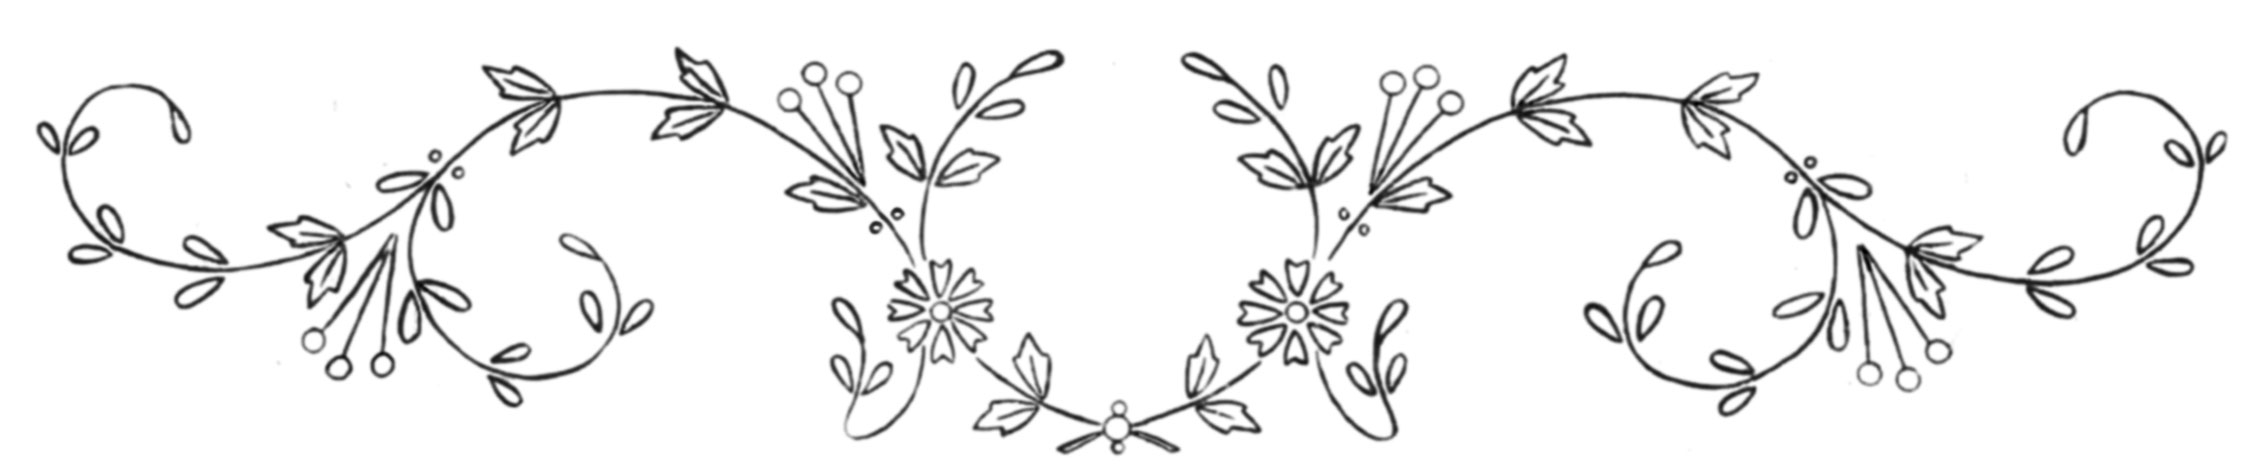 Free Embroidery Pattern Free Pattern Friday Embroidery Designs For Pillowcases Q Is For